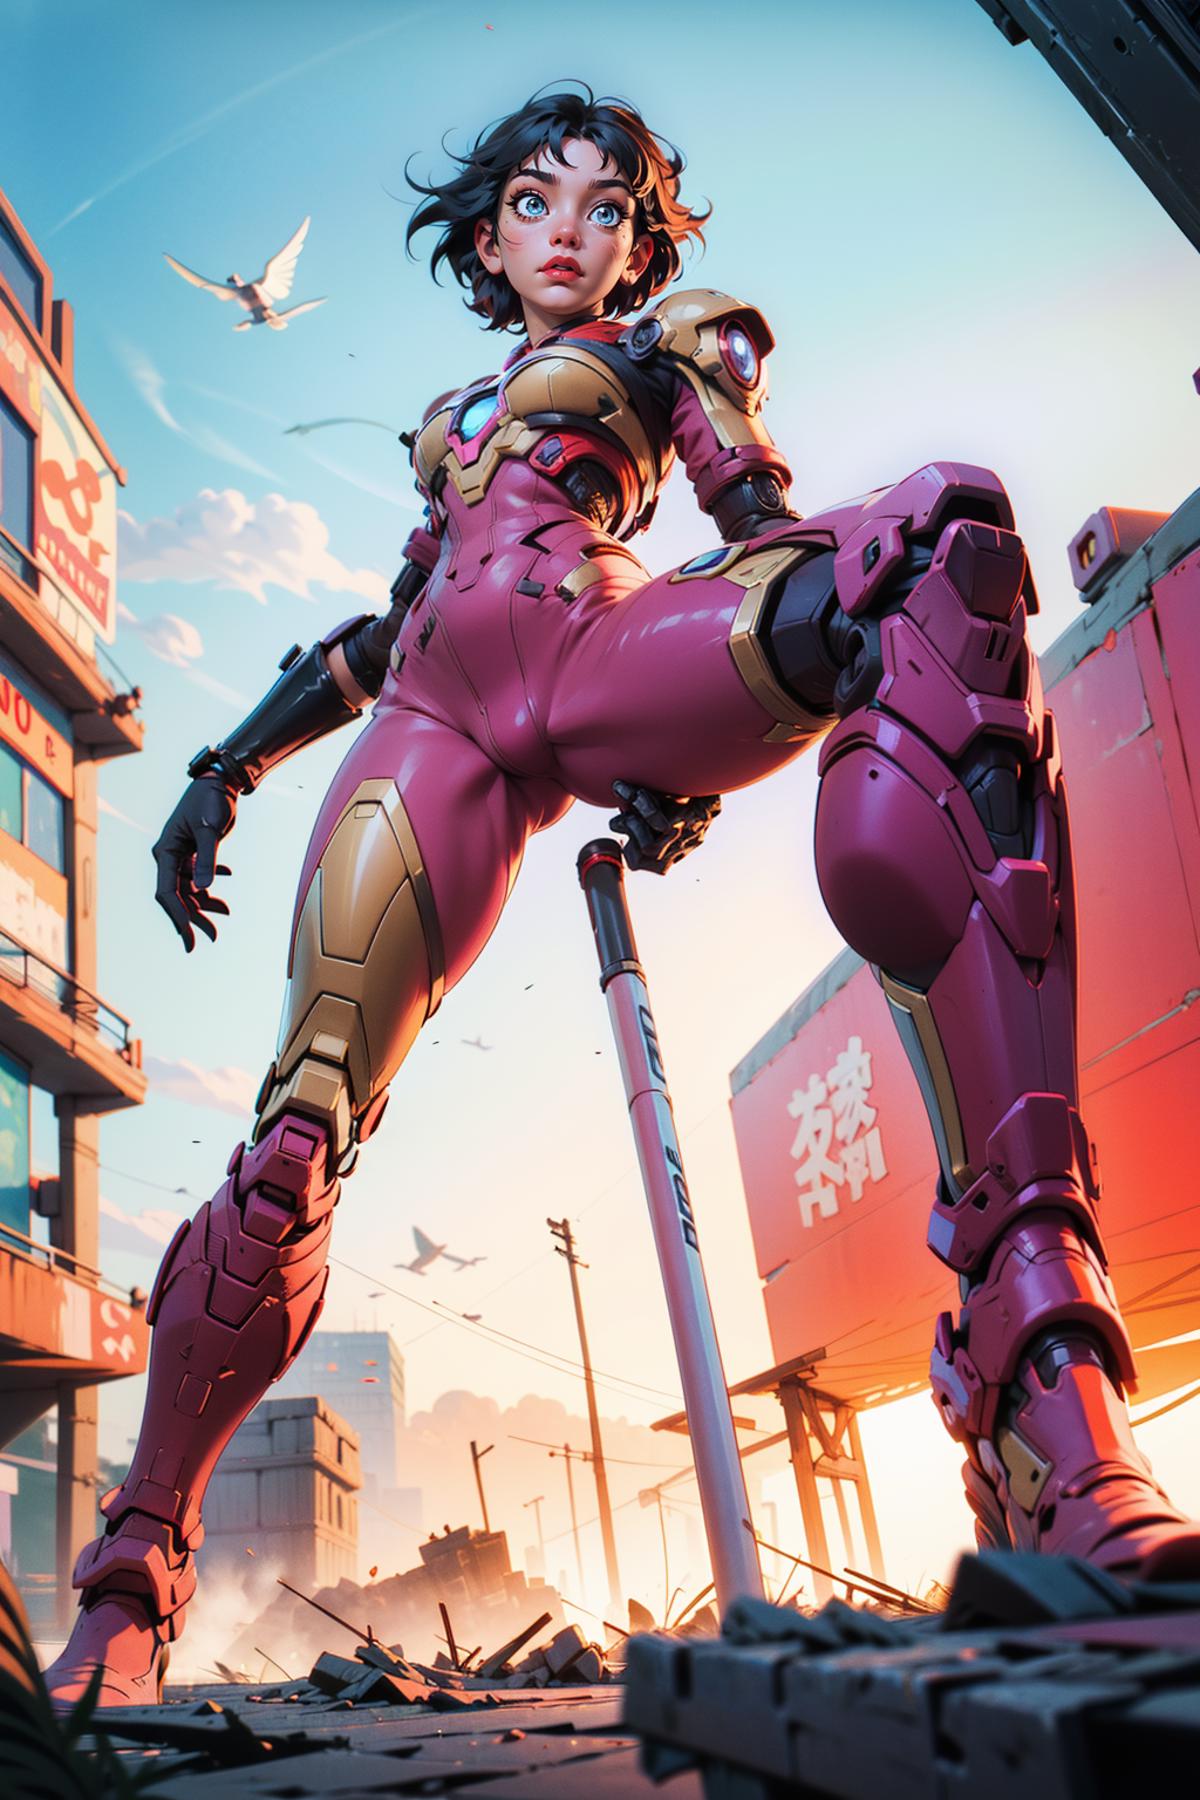 3D Rendering of a Woman in a Pink and Gold Iron Man Suit Standing on a Pole.